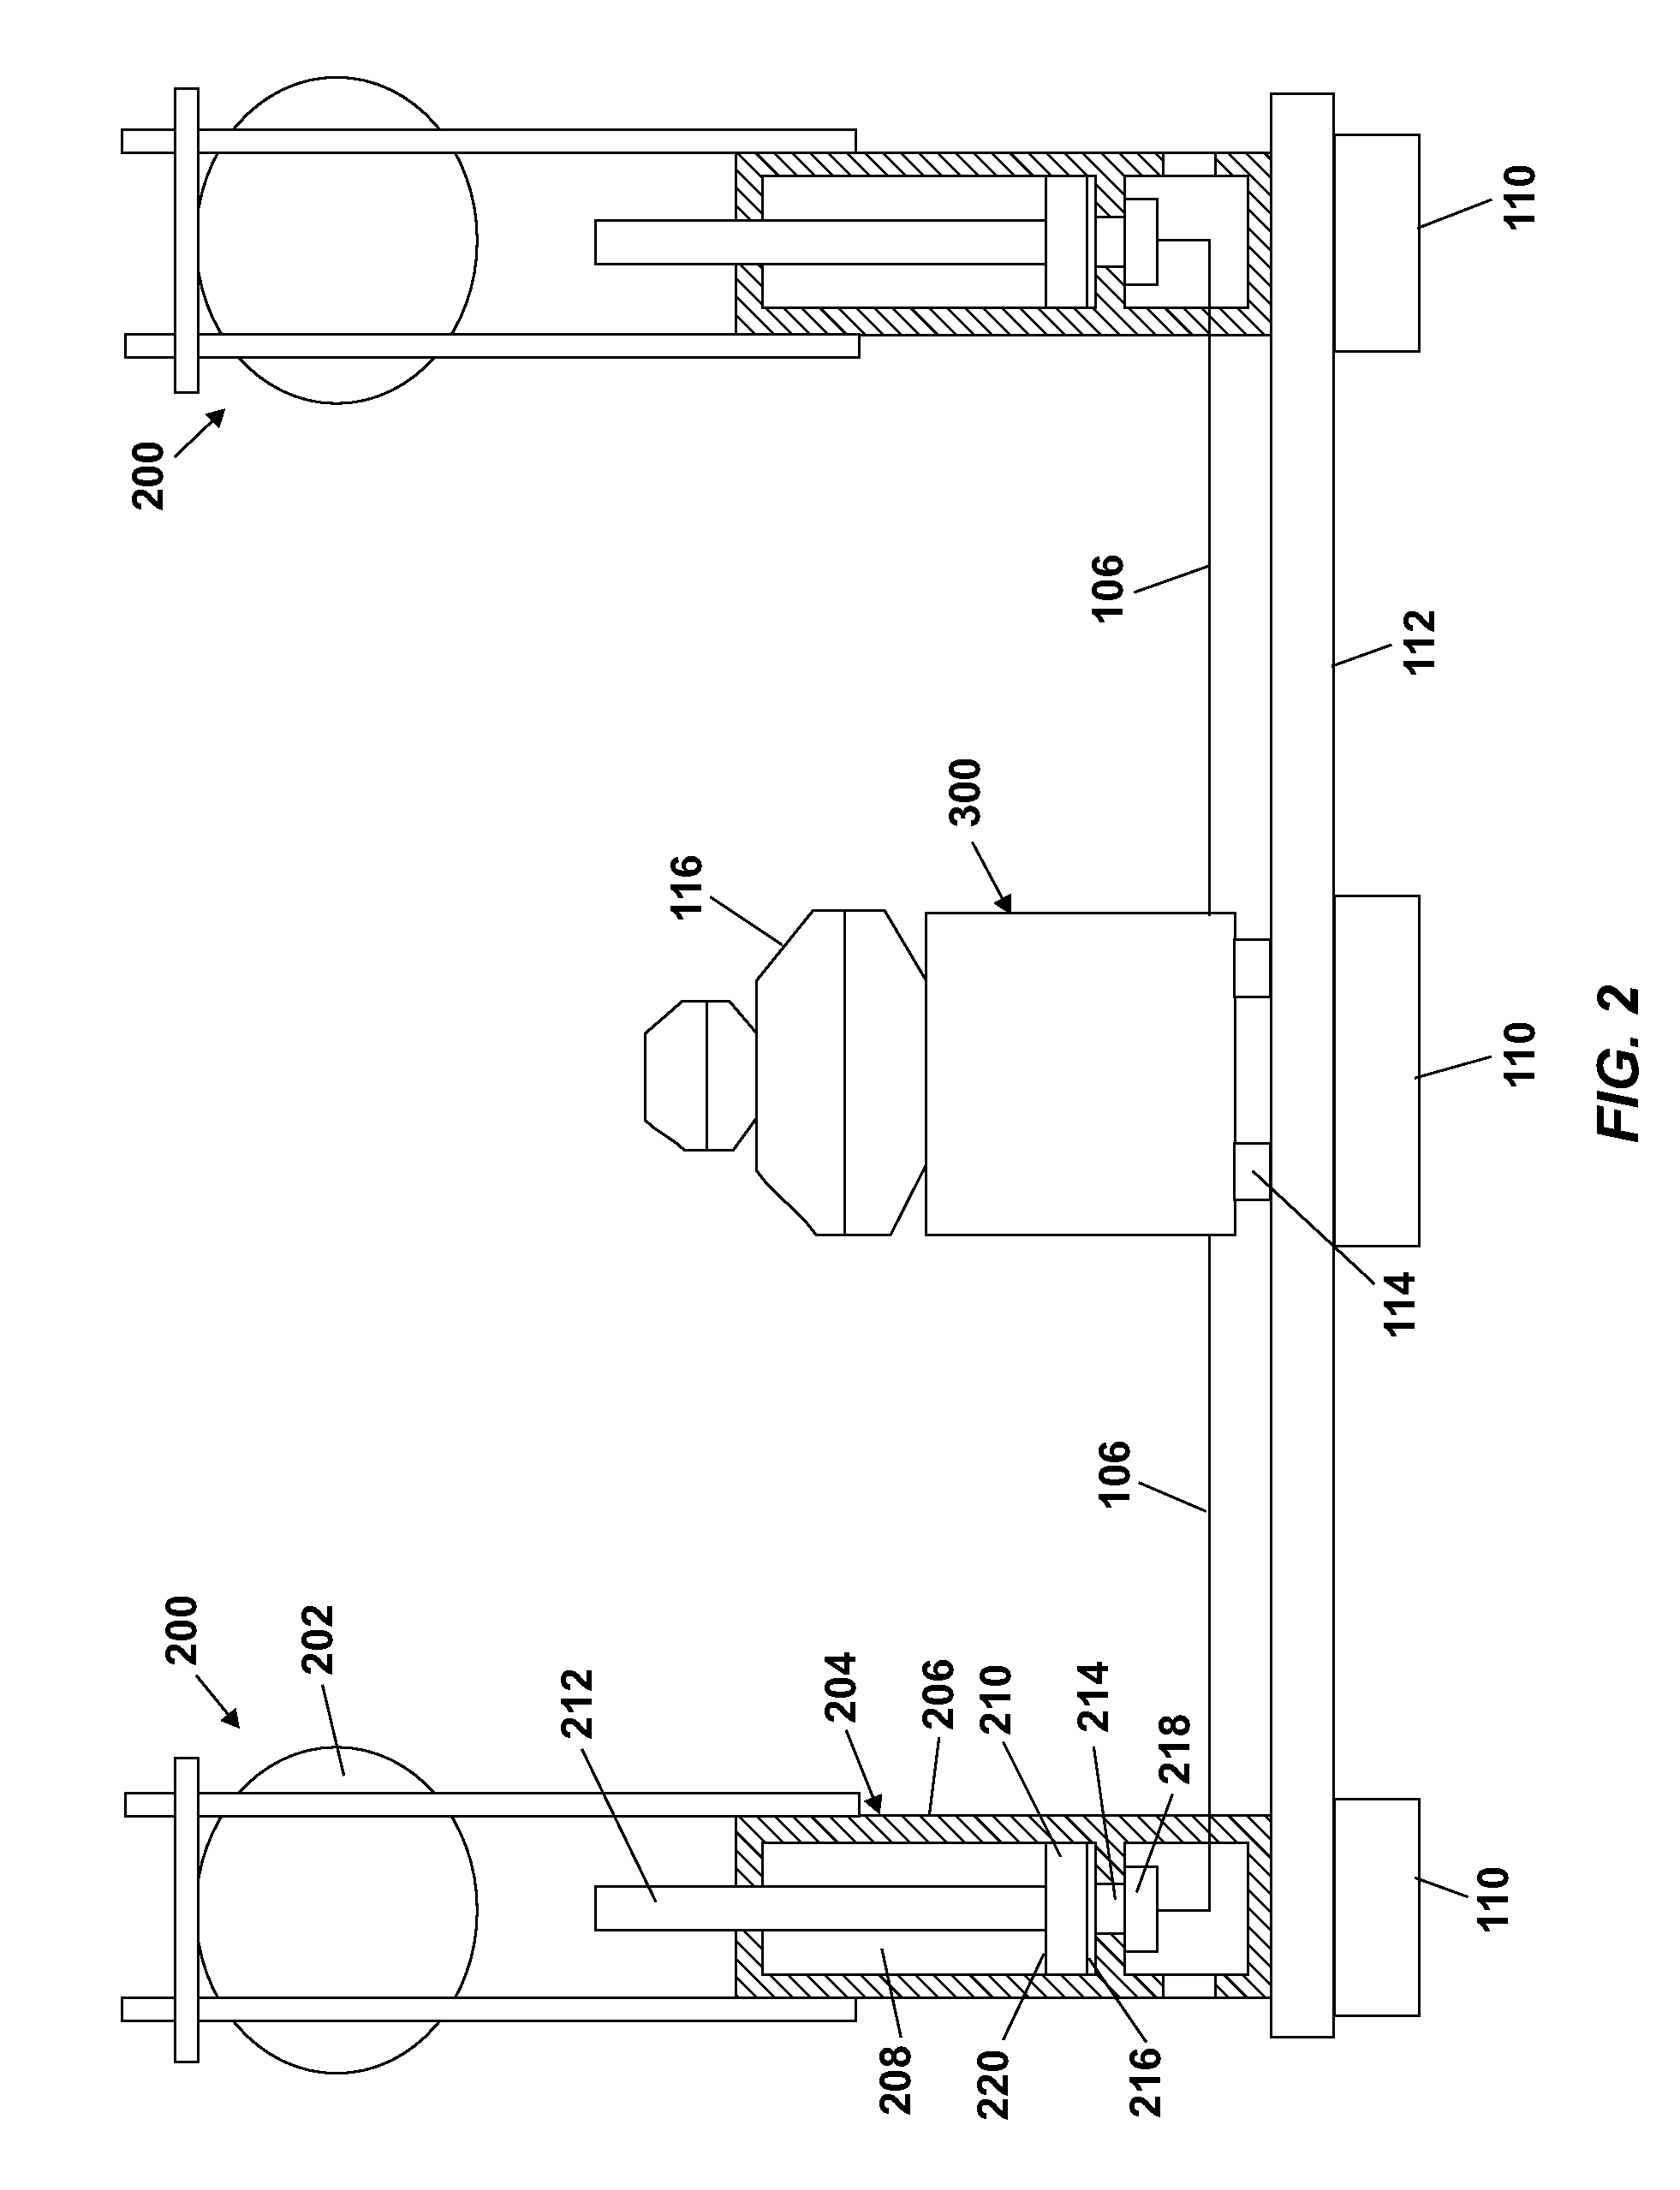 Seabed seismic source apparatus